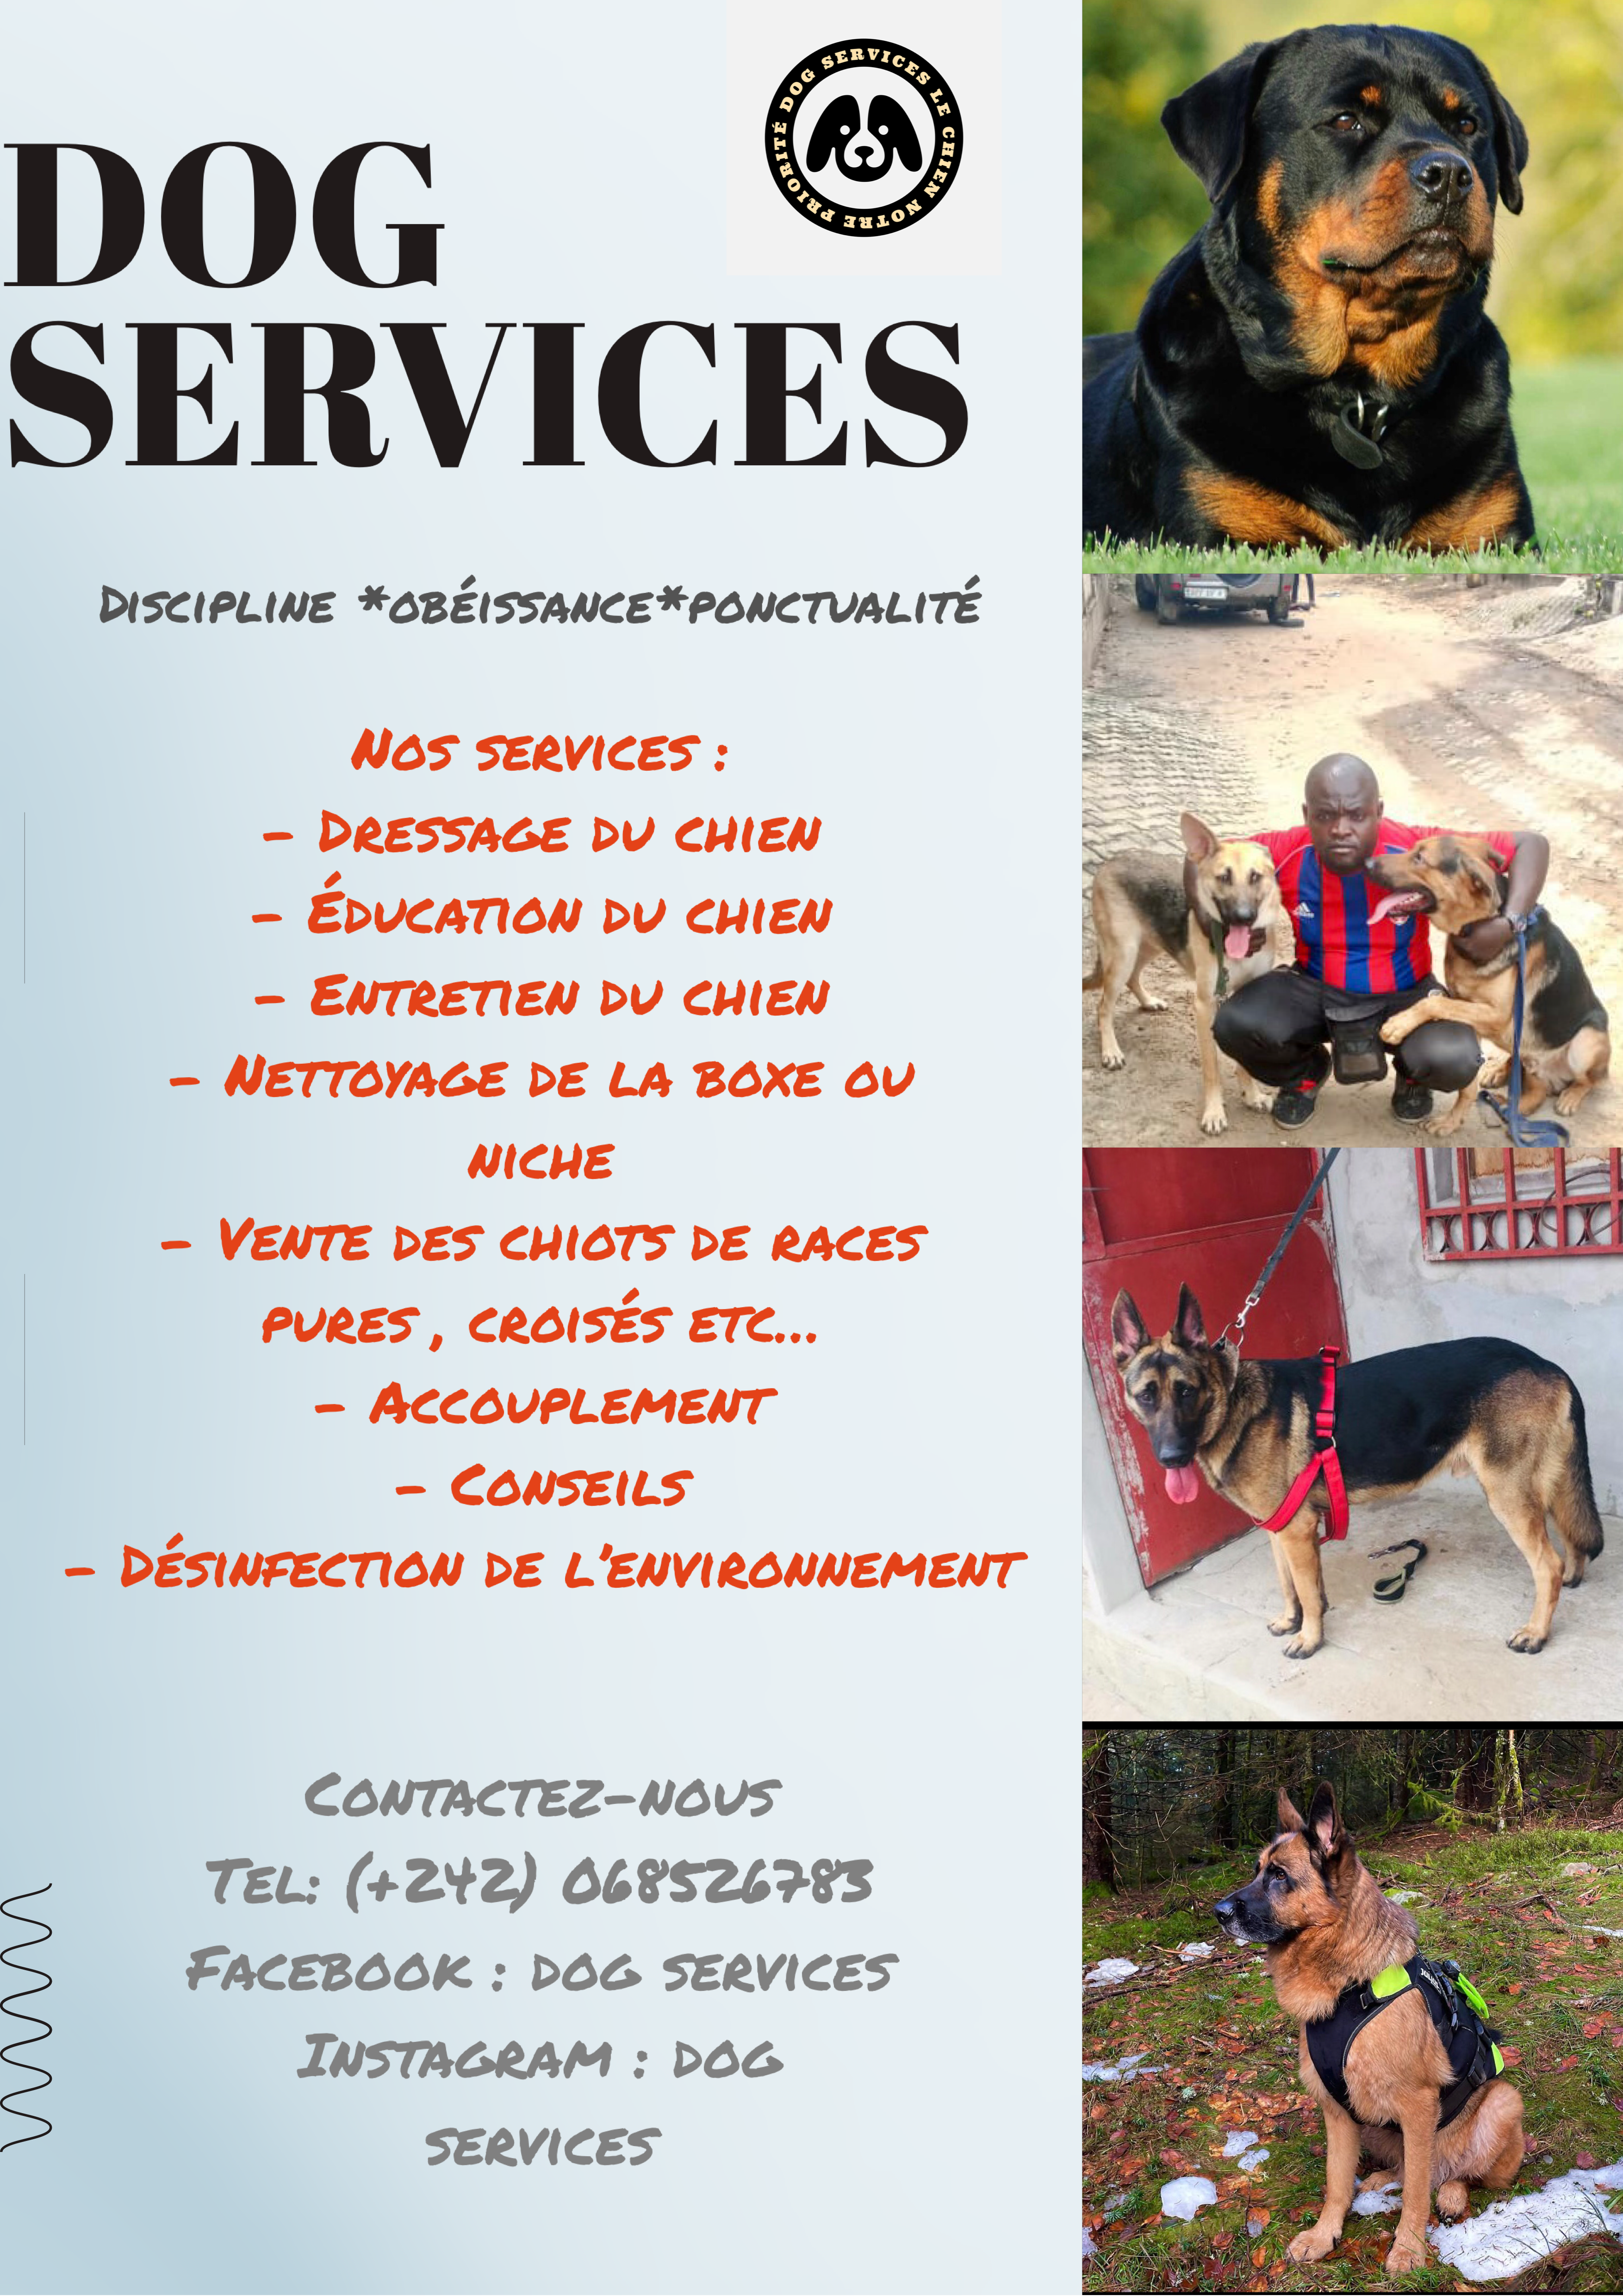 Dog services